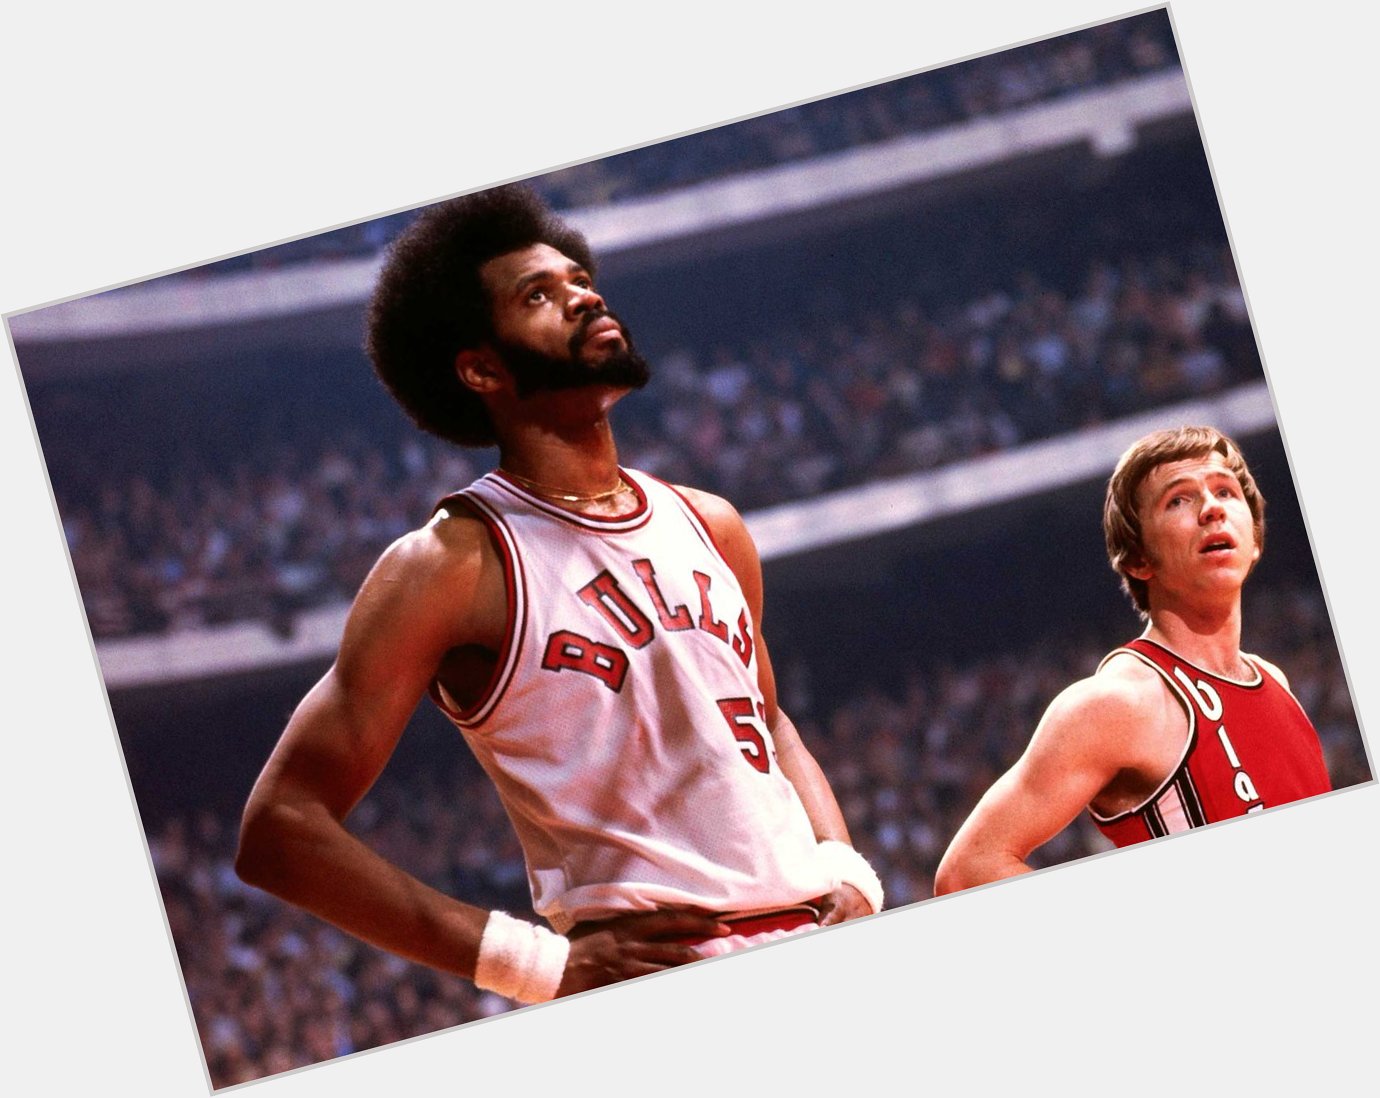   Oh, btw, Happy Birthday to the great Artis Gilmore! Anyone whoever saw him knows.... 